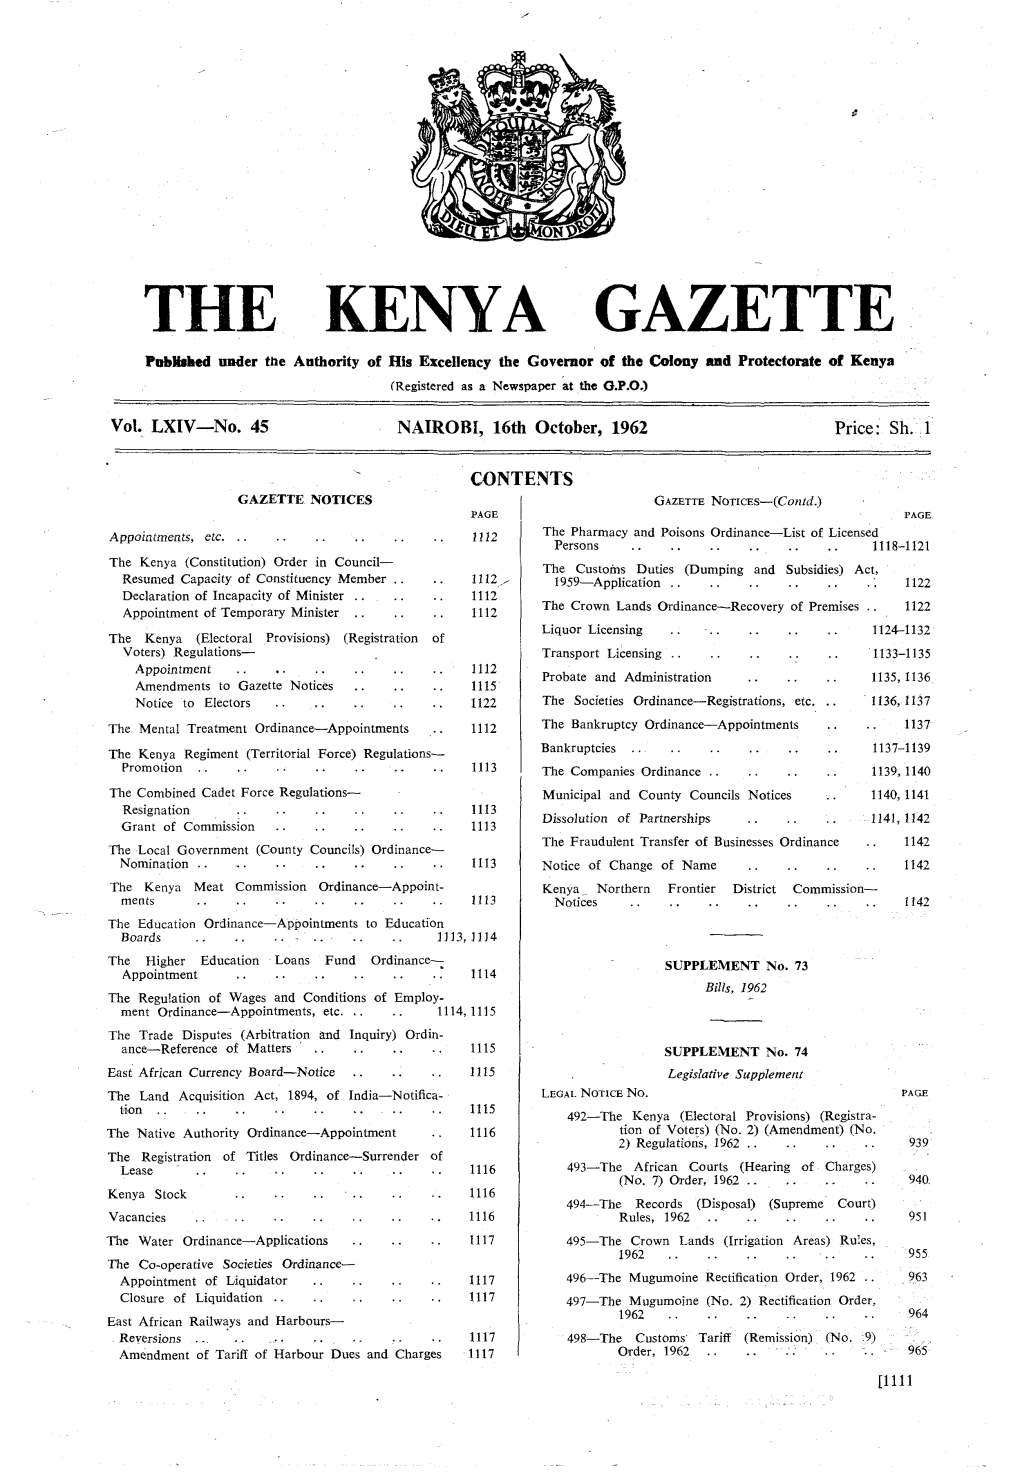 THE KENYA GAZETTE Poblbhed Nuder the Authority of His Excellency the Governor of the Wany and Protectorate of Kenya (Registered As a Newspaper at the 0.P.O.)